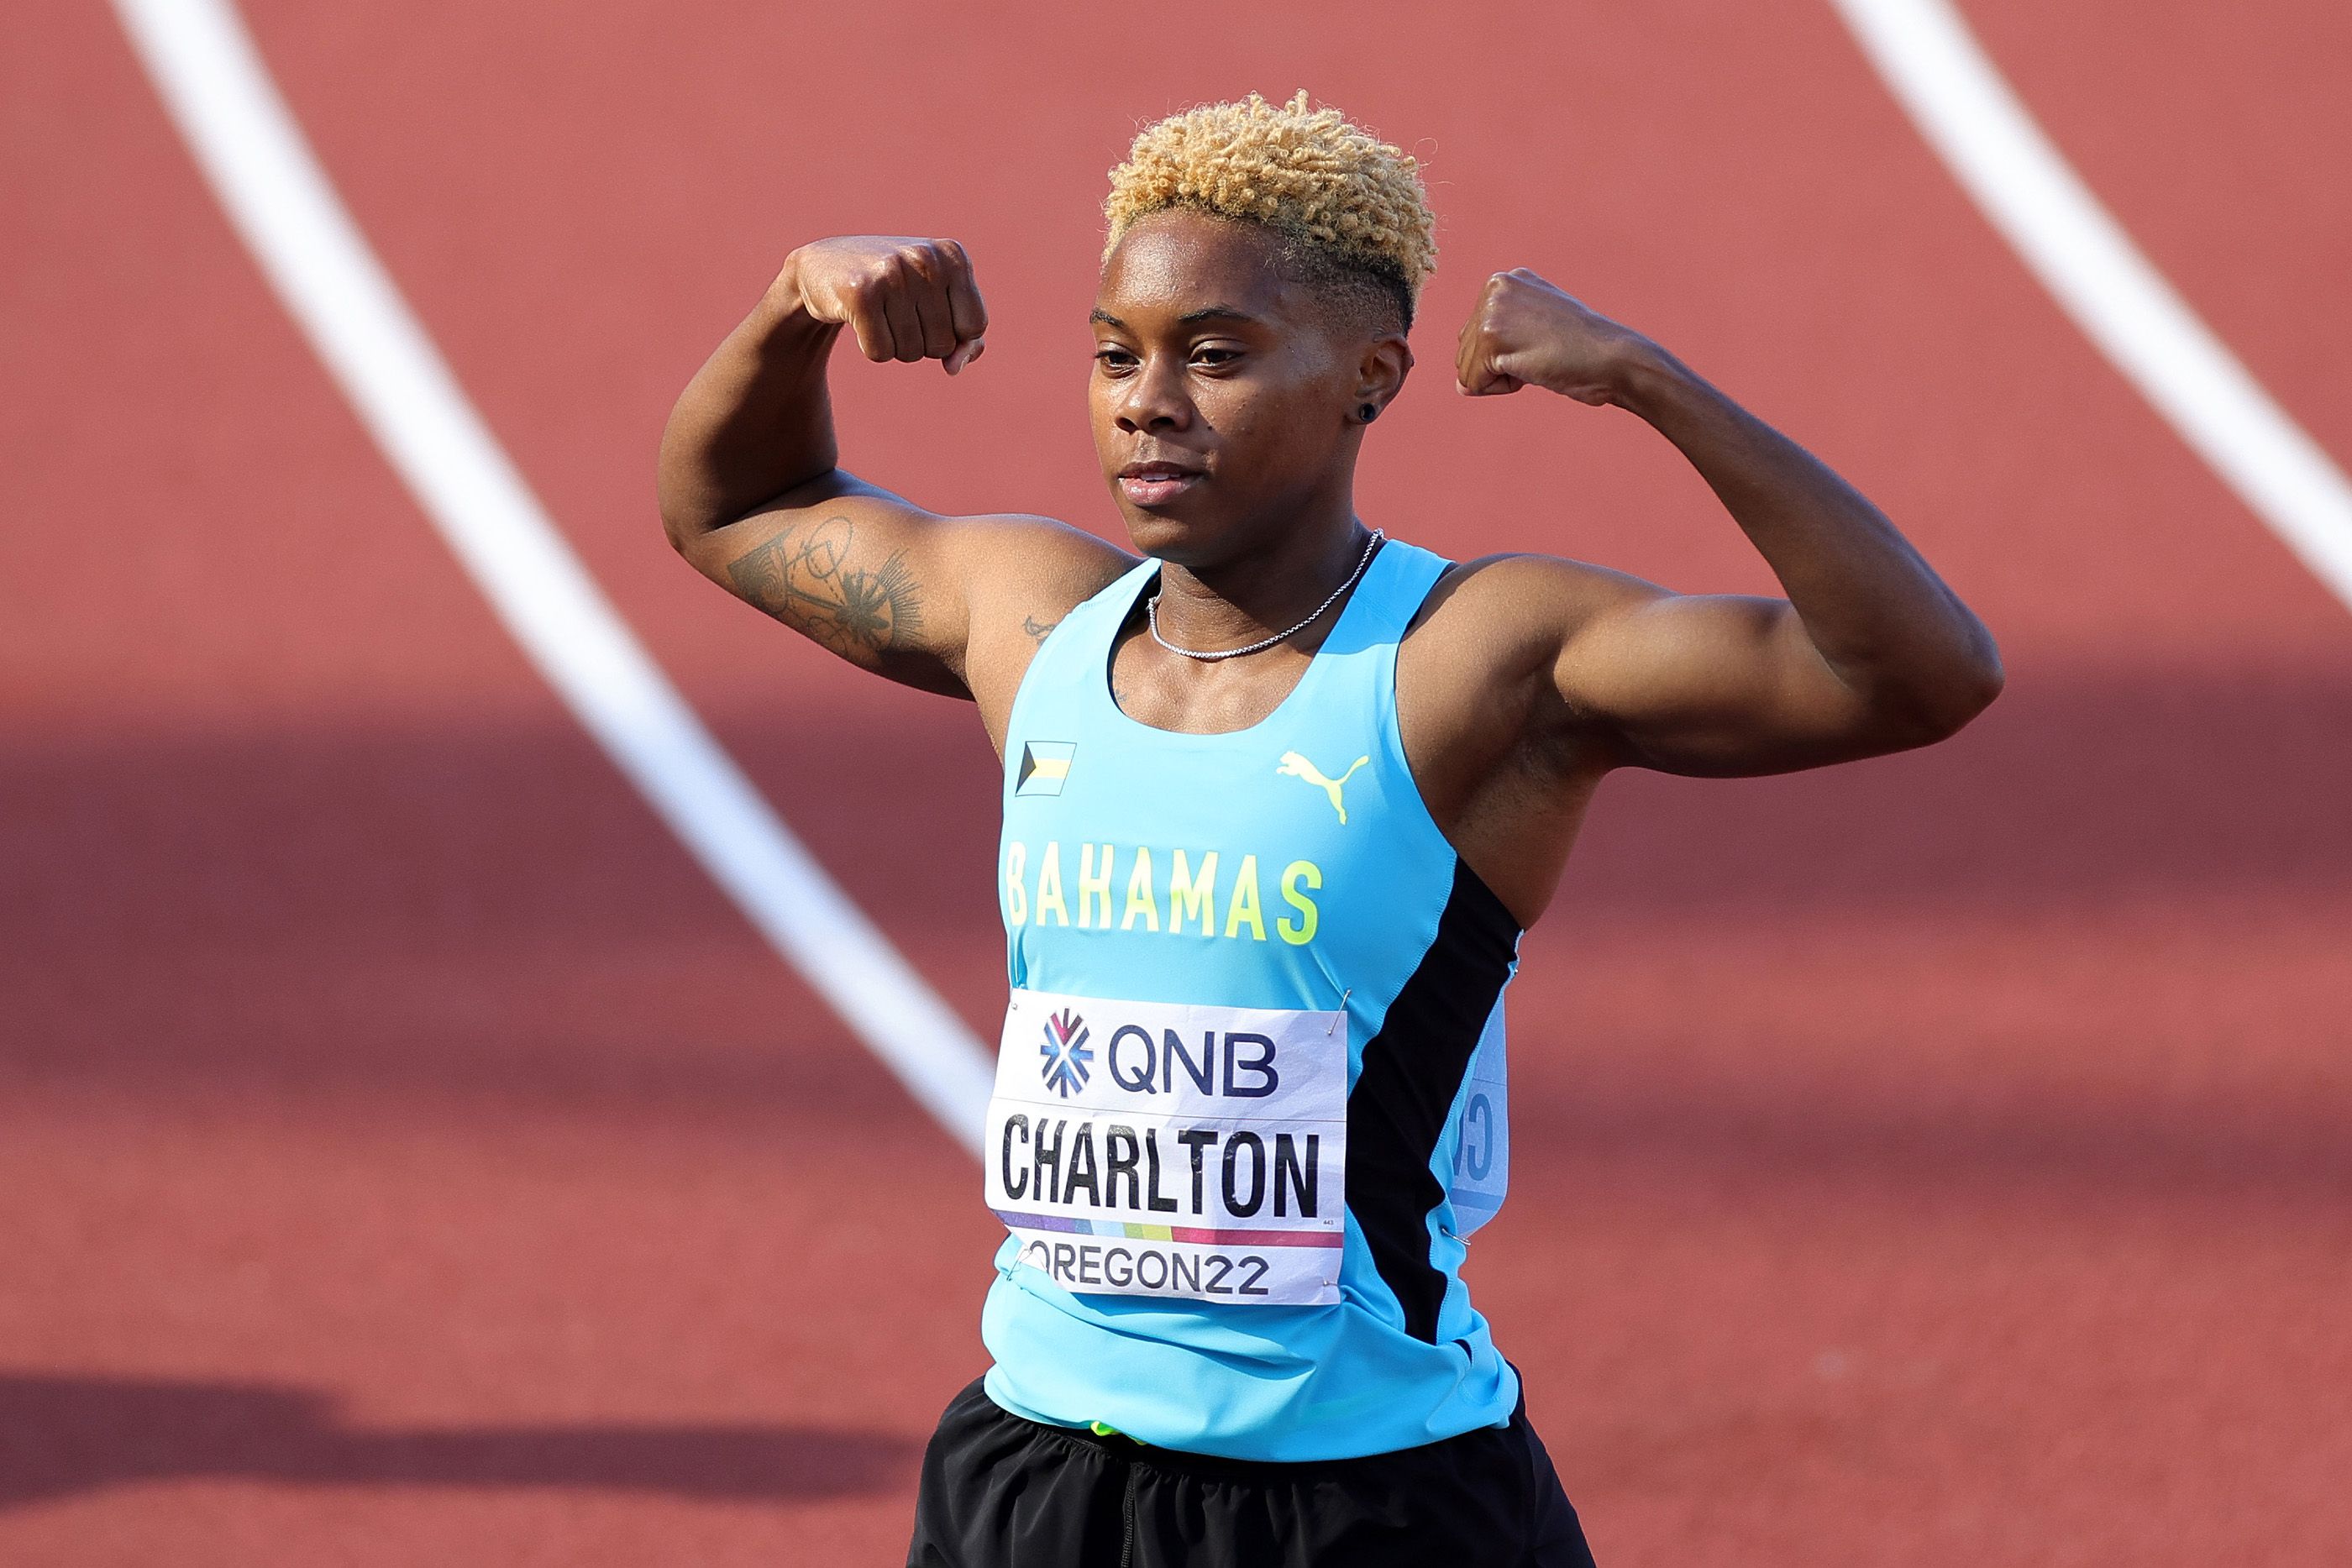 Bahamian hurdles star Charlton, clearing barriers and blazing a trail | News | Budapest 23